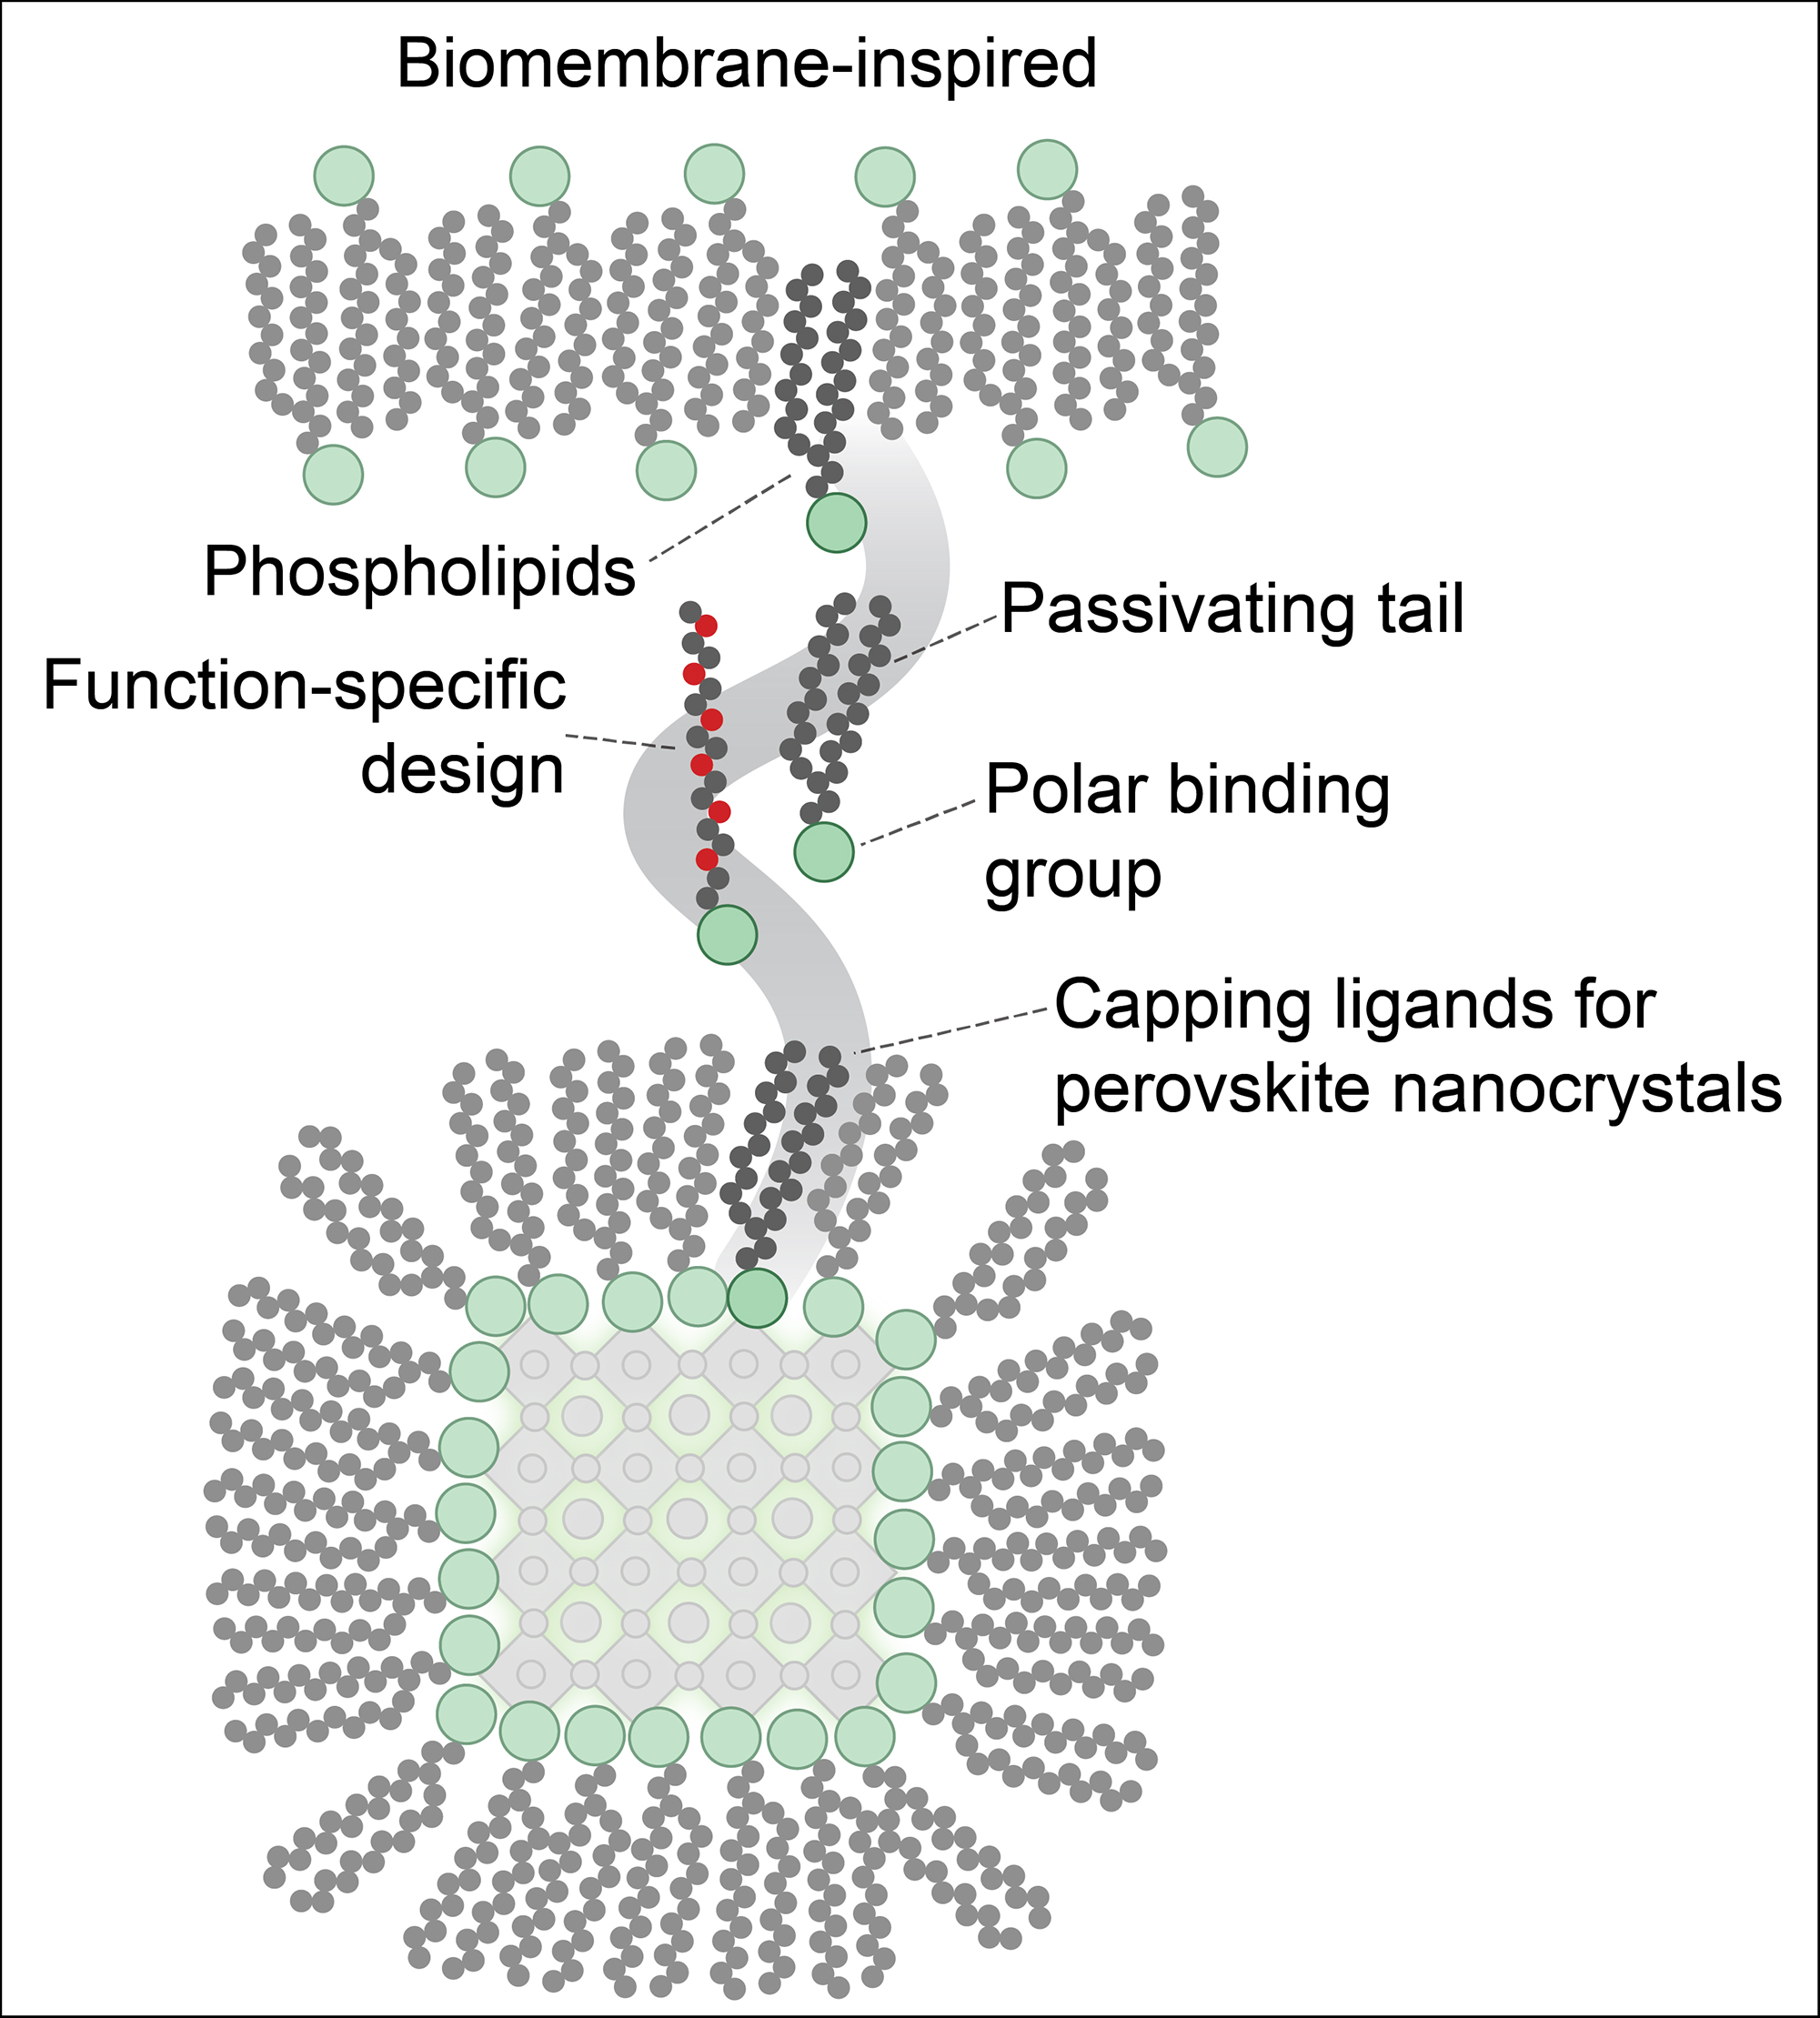 Enlarged view: Illustration of how the phospholipids form a protective coating around the nanocrystal.